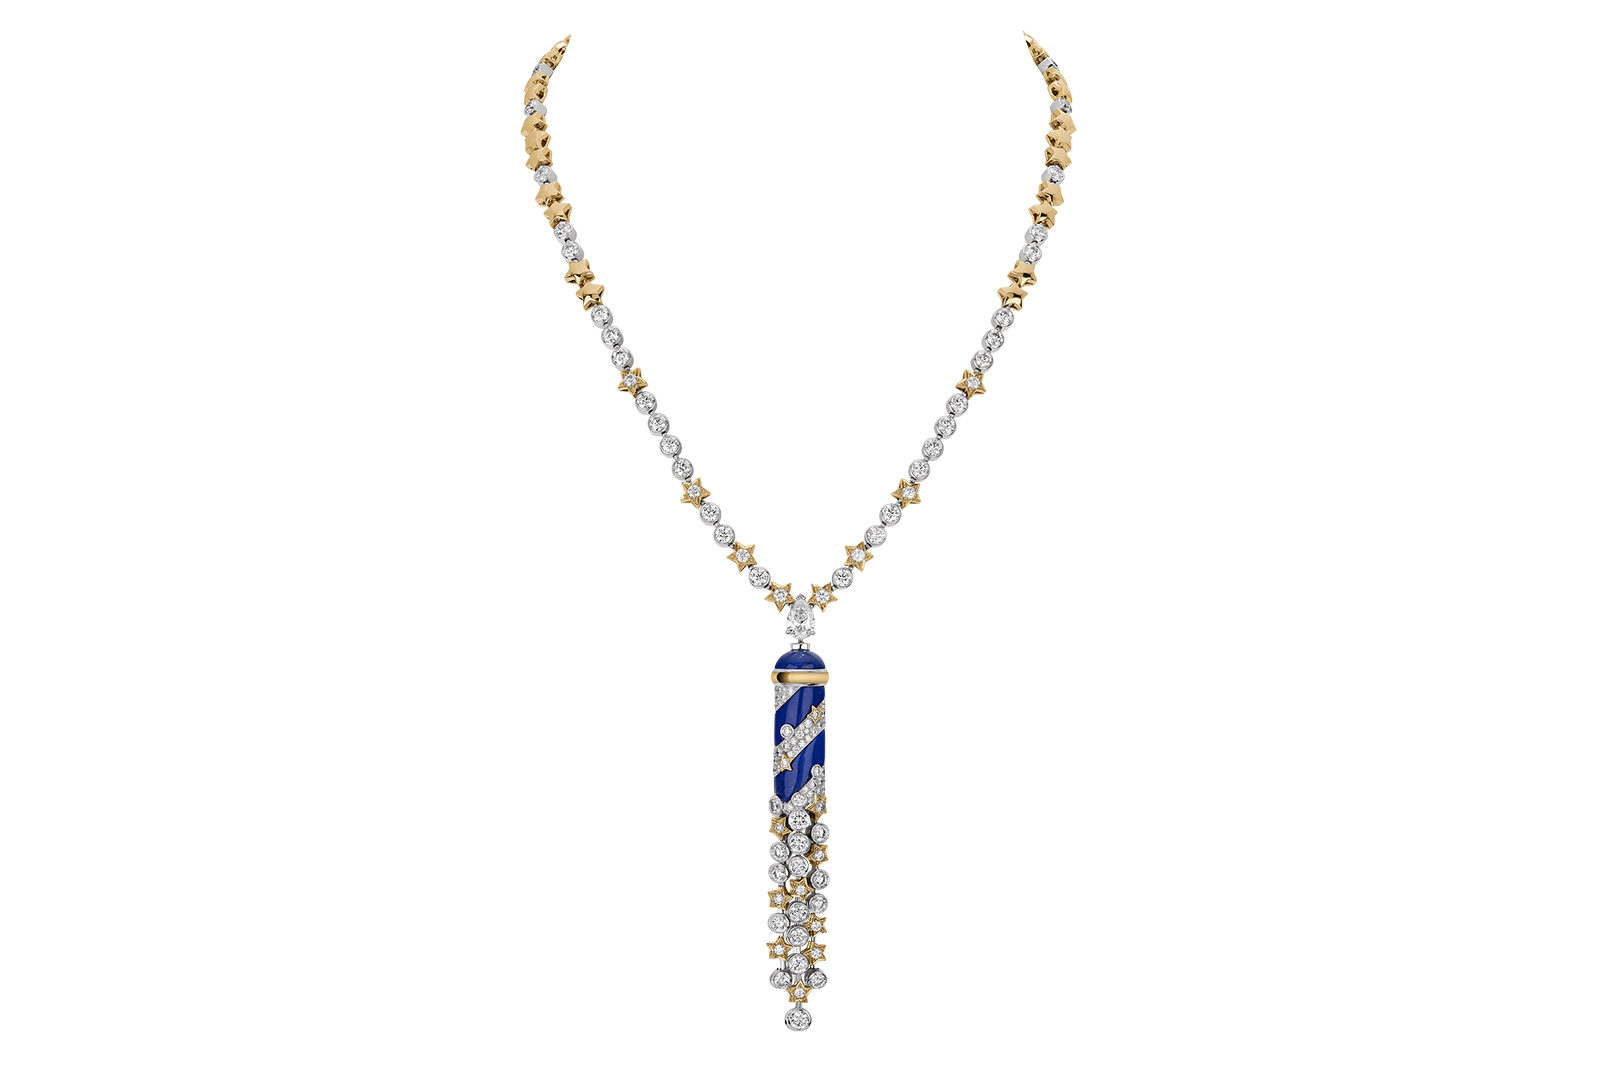 Chanel high jewellery collection celebrates the spirit of Venice